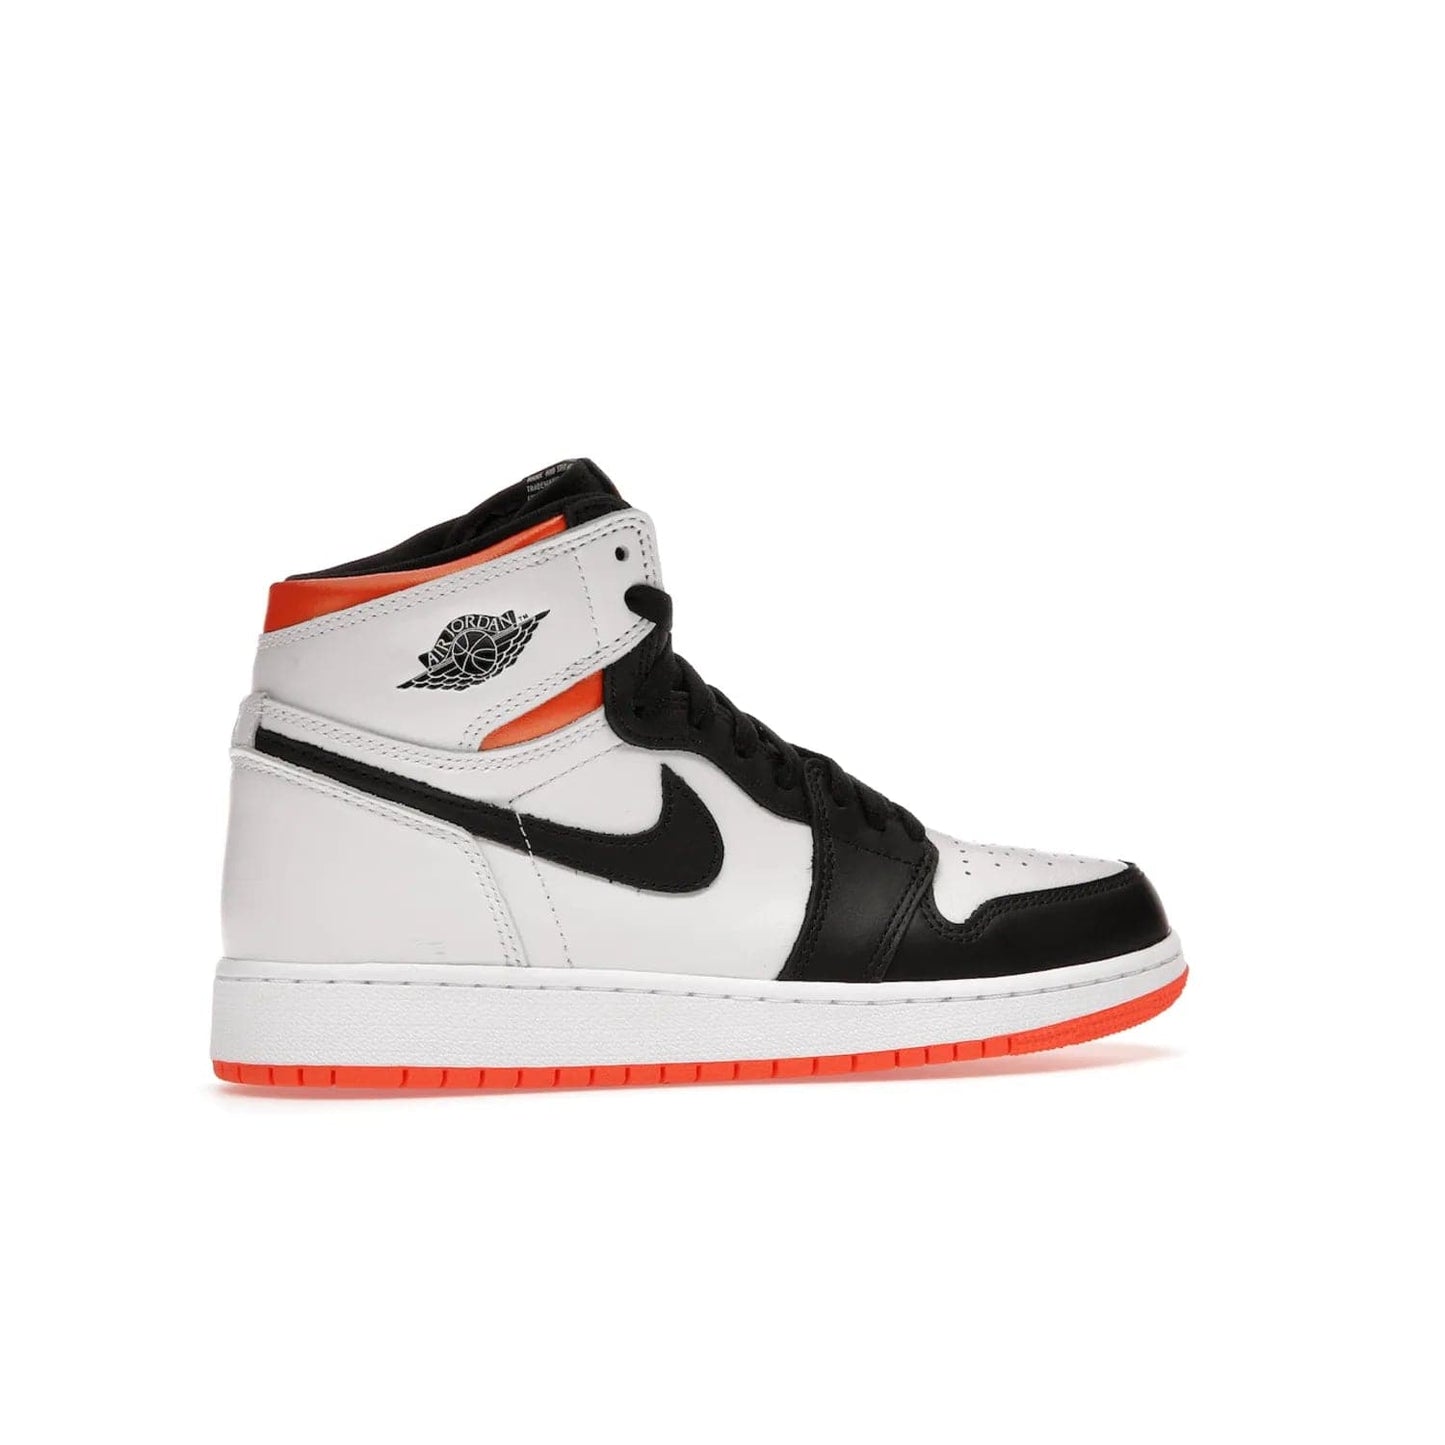 Jordan 1 High OG Electro Orange (GS) - Image 35 - Only at www.BallersClubKickz.com - The Air Jordan 1 High OG Electro Orange GS is the ideal shoe for kids on the go. Featuring white leather uppers, black overlays, and bright orange accents, it's sure to become a favorite. A great mix of classic style and vibrant colors, the shoe delivers air cushioning for comfort and hard orange rubber for grip. Release on July 17th, 2021. Get them a pair today.